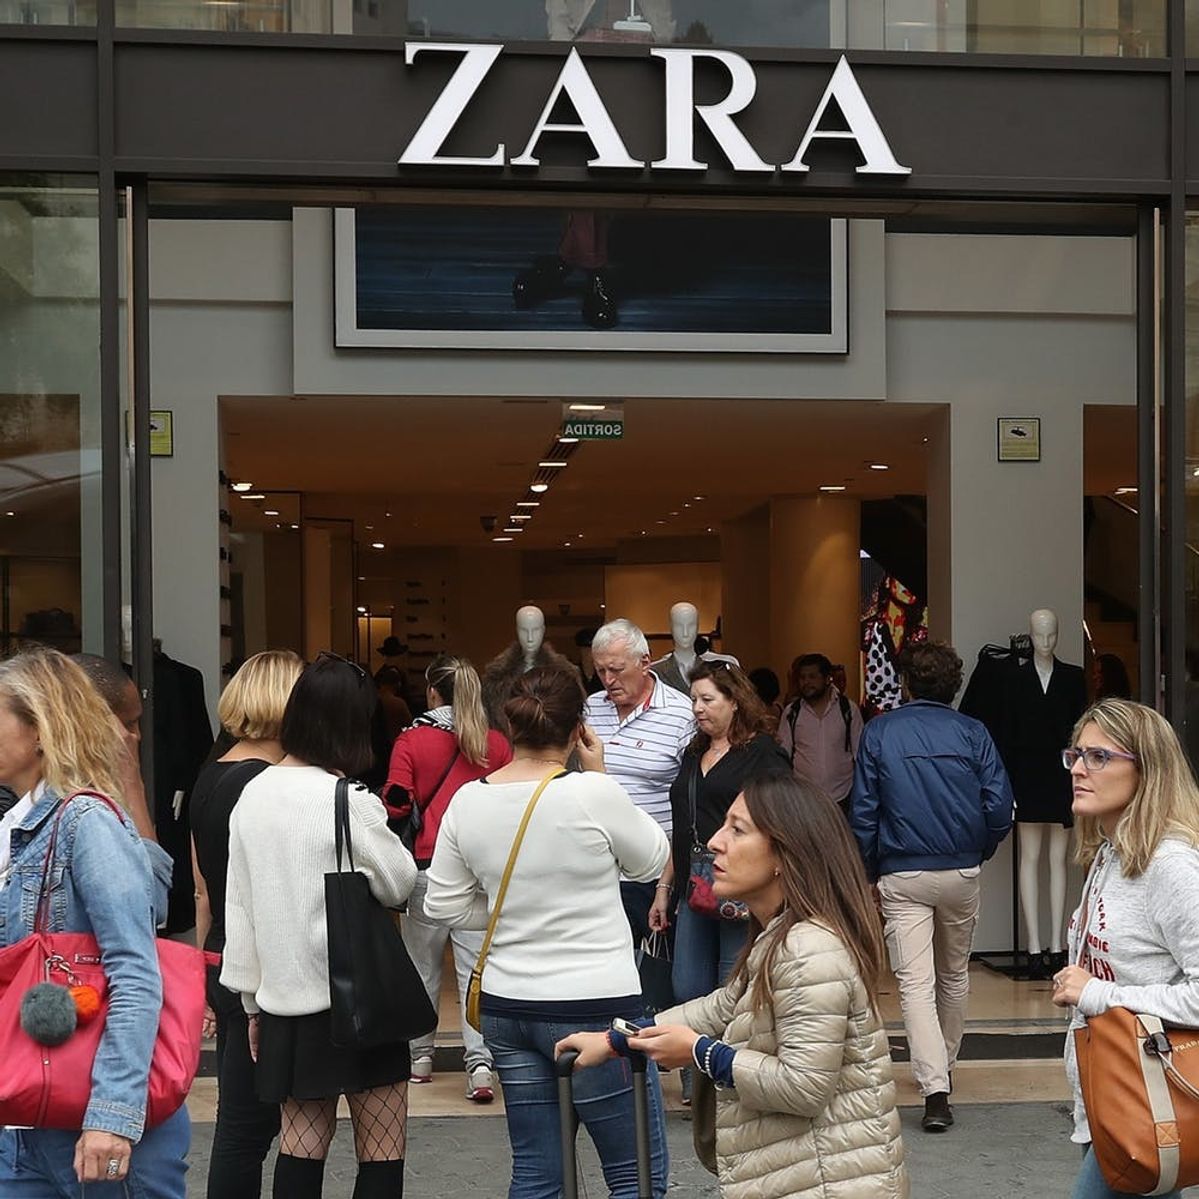 Zara Is Facing Heat After Unpaid Workers Allegedly Sew Messages into Clothing Tags